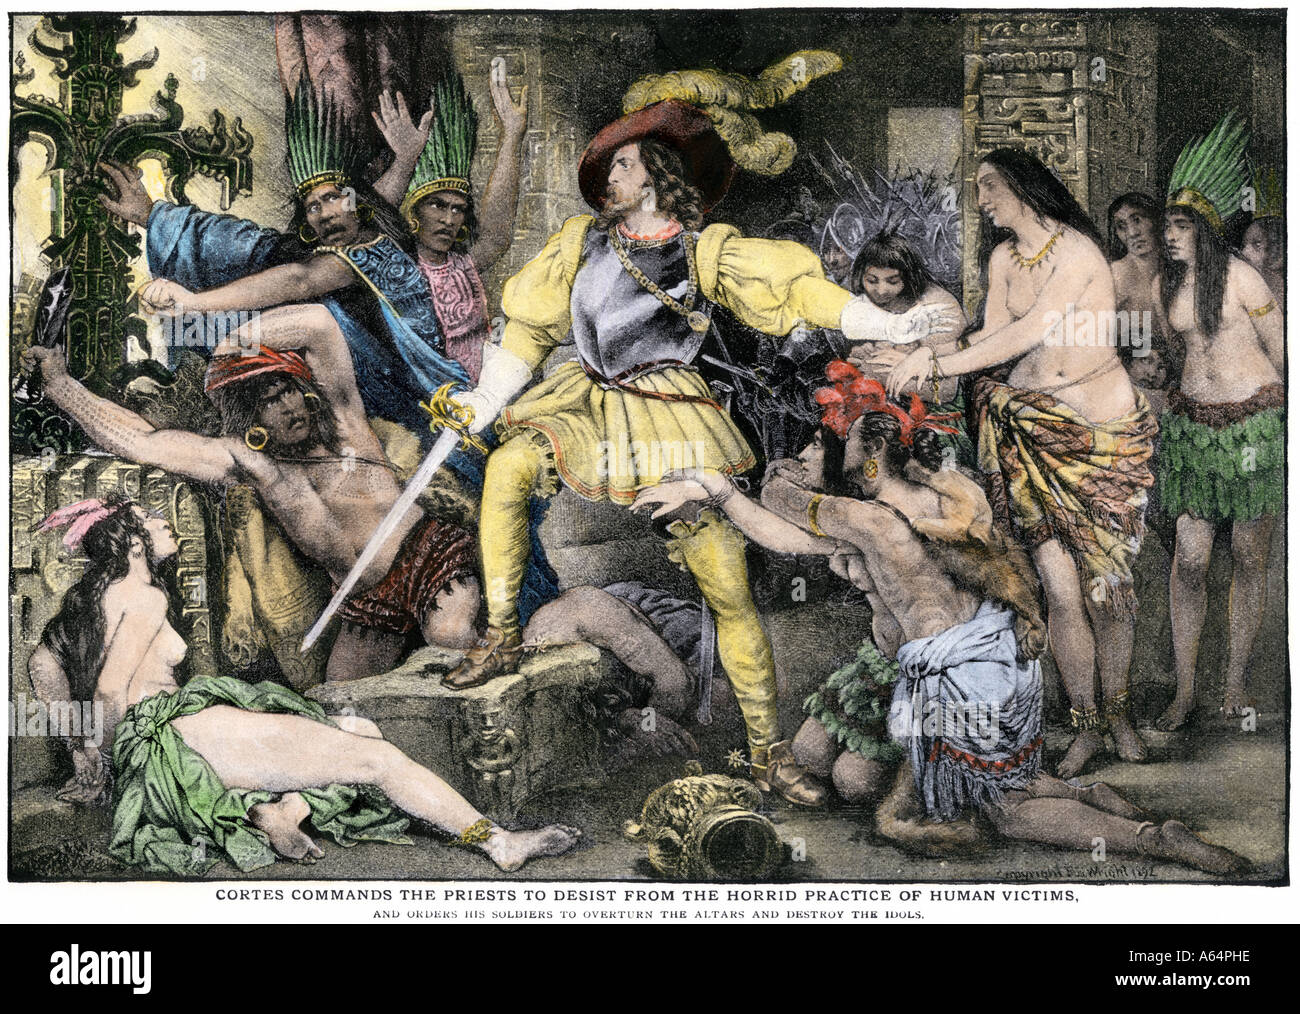 Hernando Cortes orders an end to the Aztec practice of human sacrifice after Spanish conquest of Mexico City. Hand-colored halftone of an illustration Stock Photo